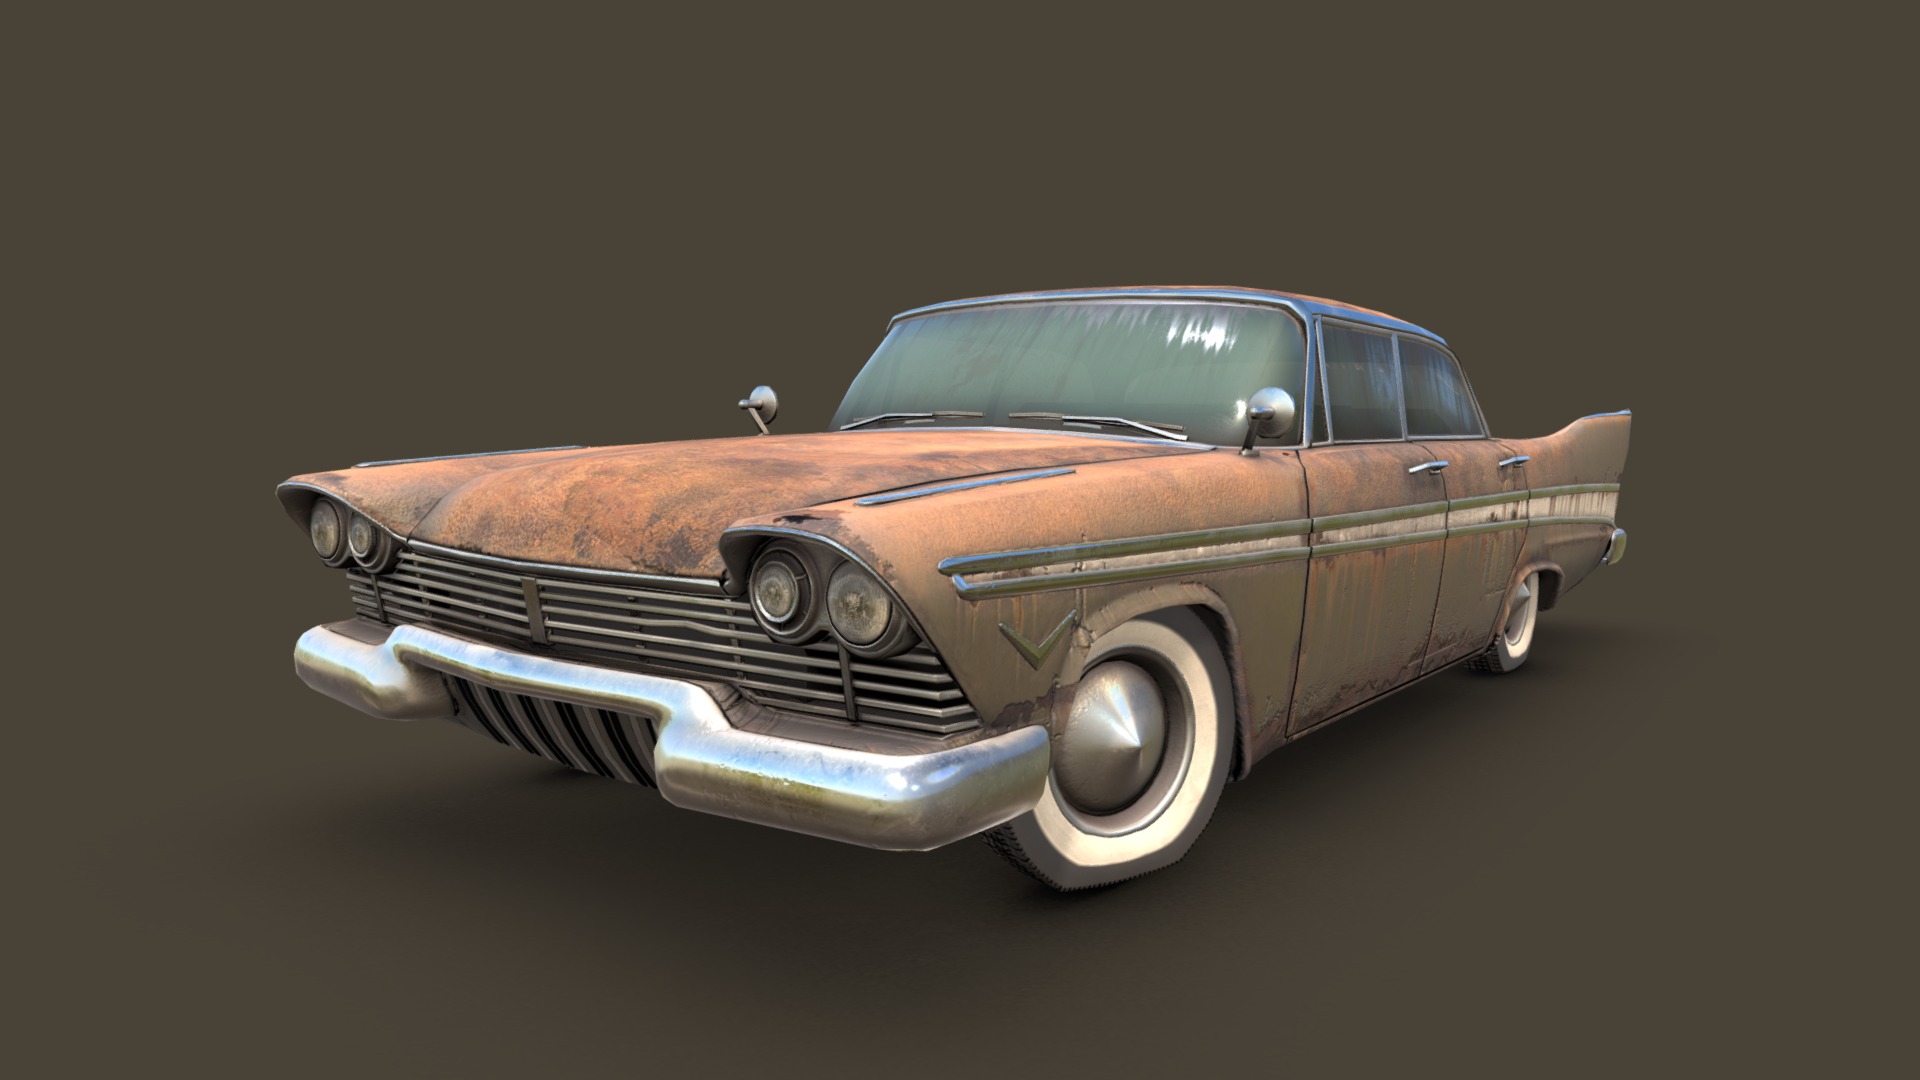 3D model 1957 Belvedere Rusty - This is a 3D model of the 1957 Belvedere Rusty. The 3D model is about a car with a hood.